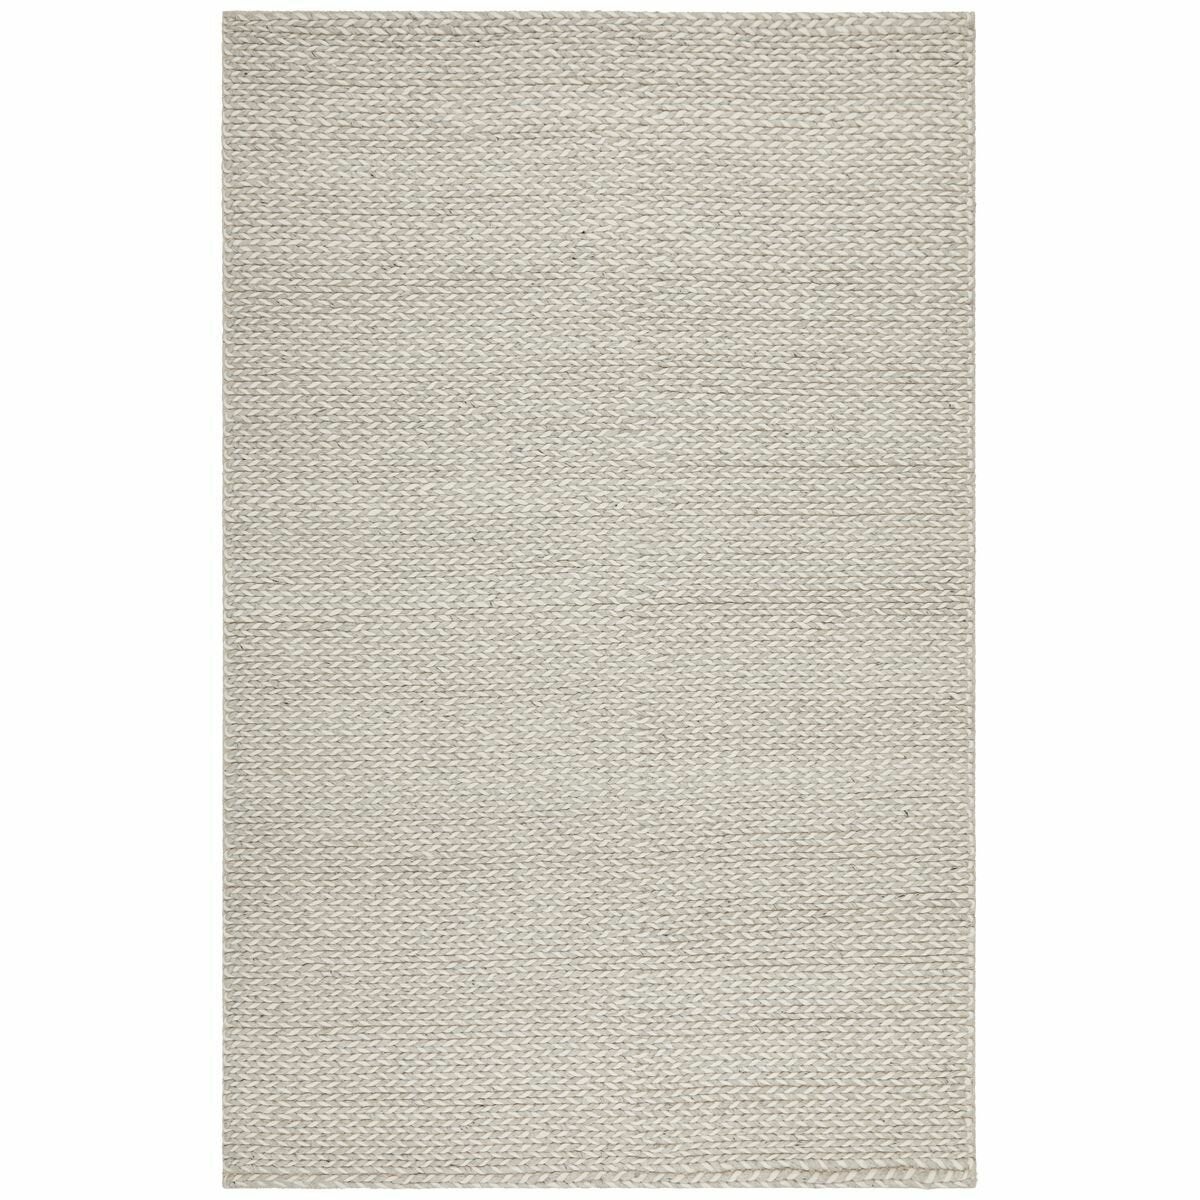 Image of Rug Culture Helena Woven Wool Rug Grey White 320x230cm STUD-321-SIL-320230